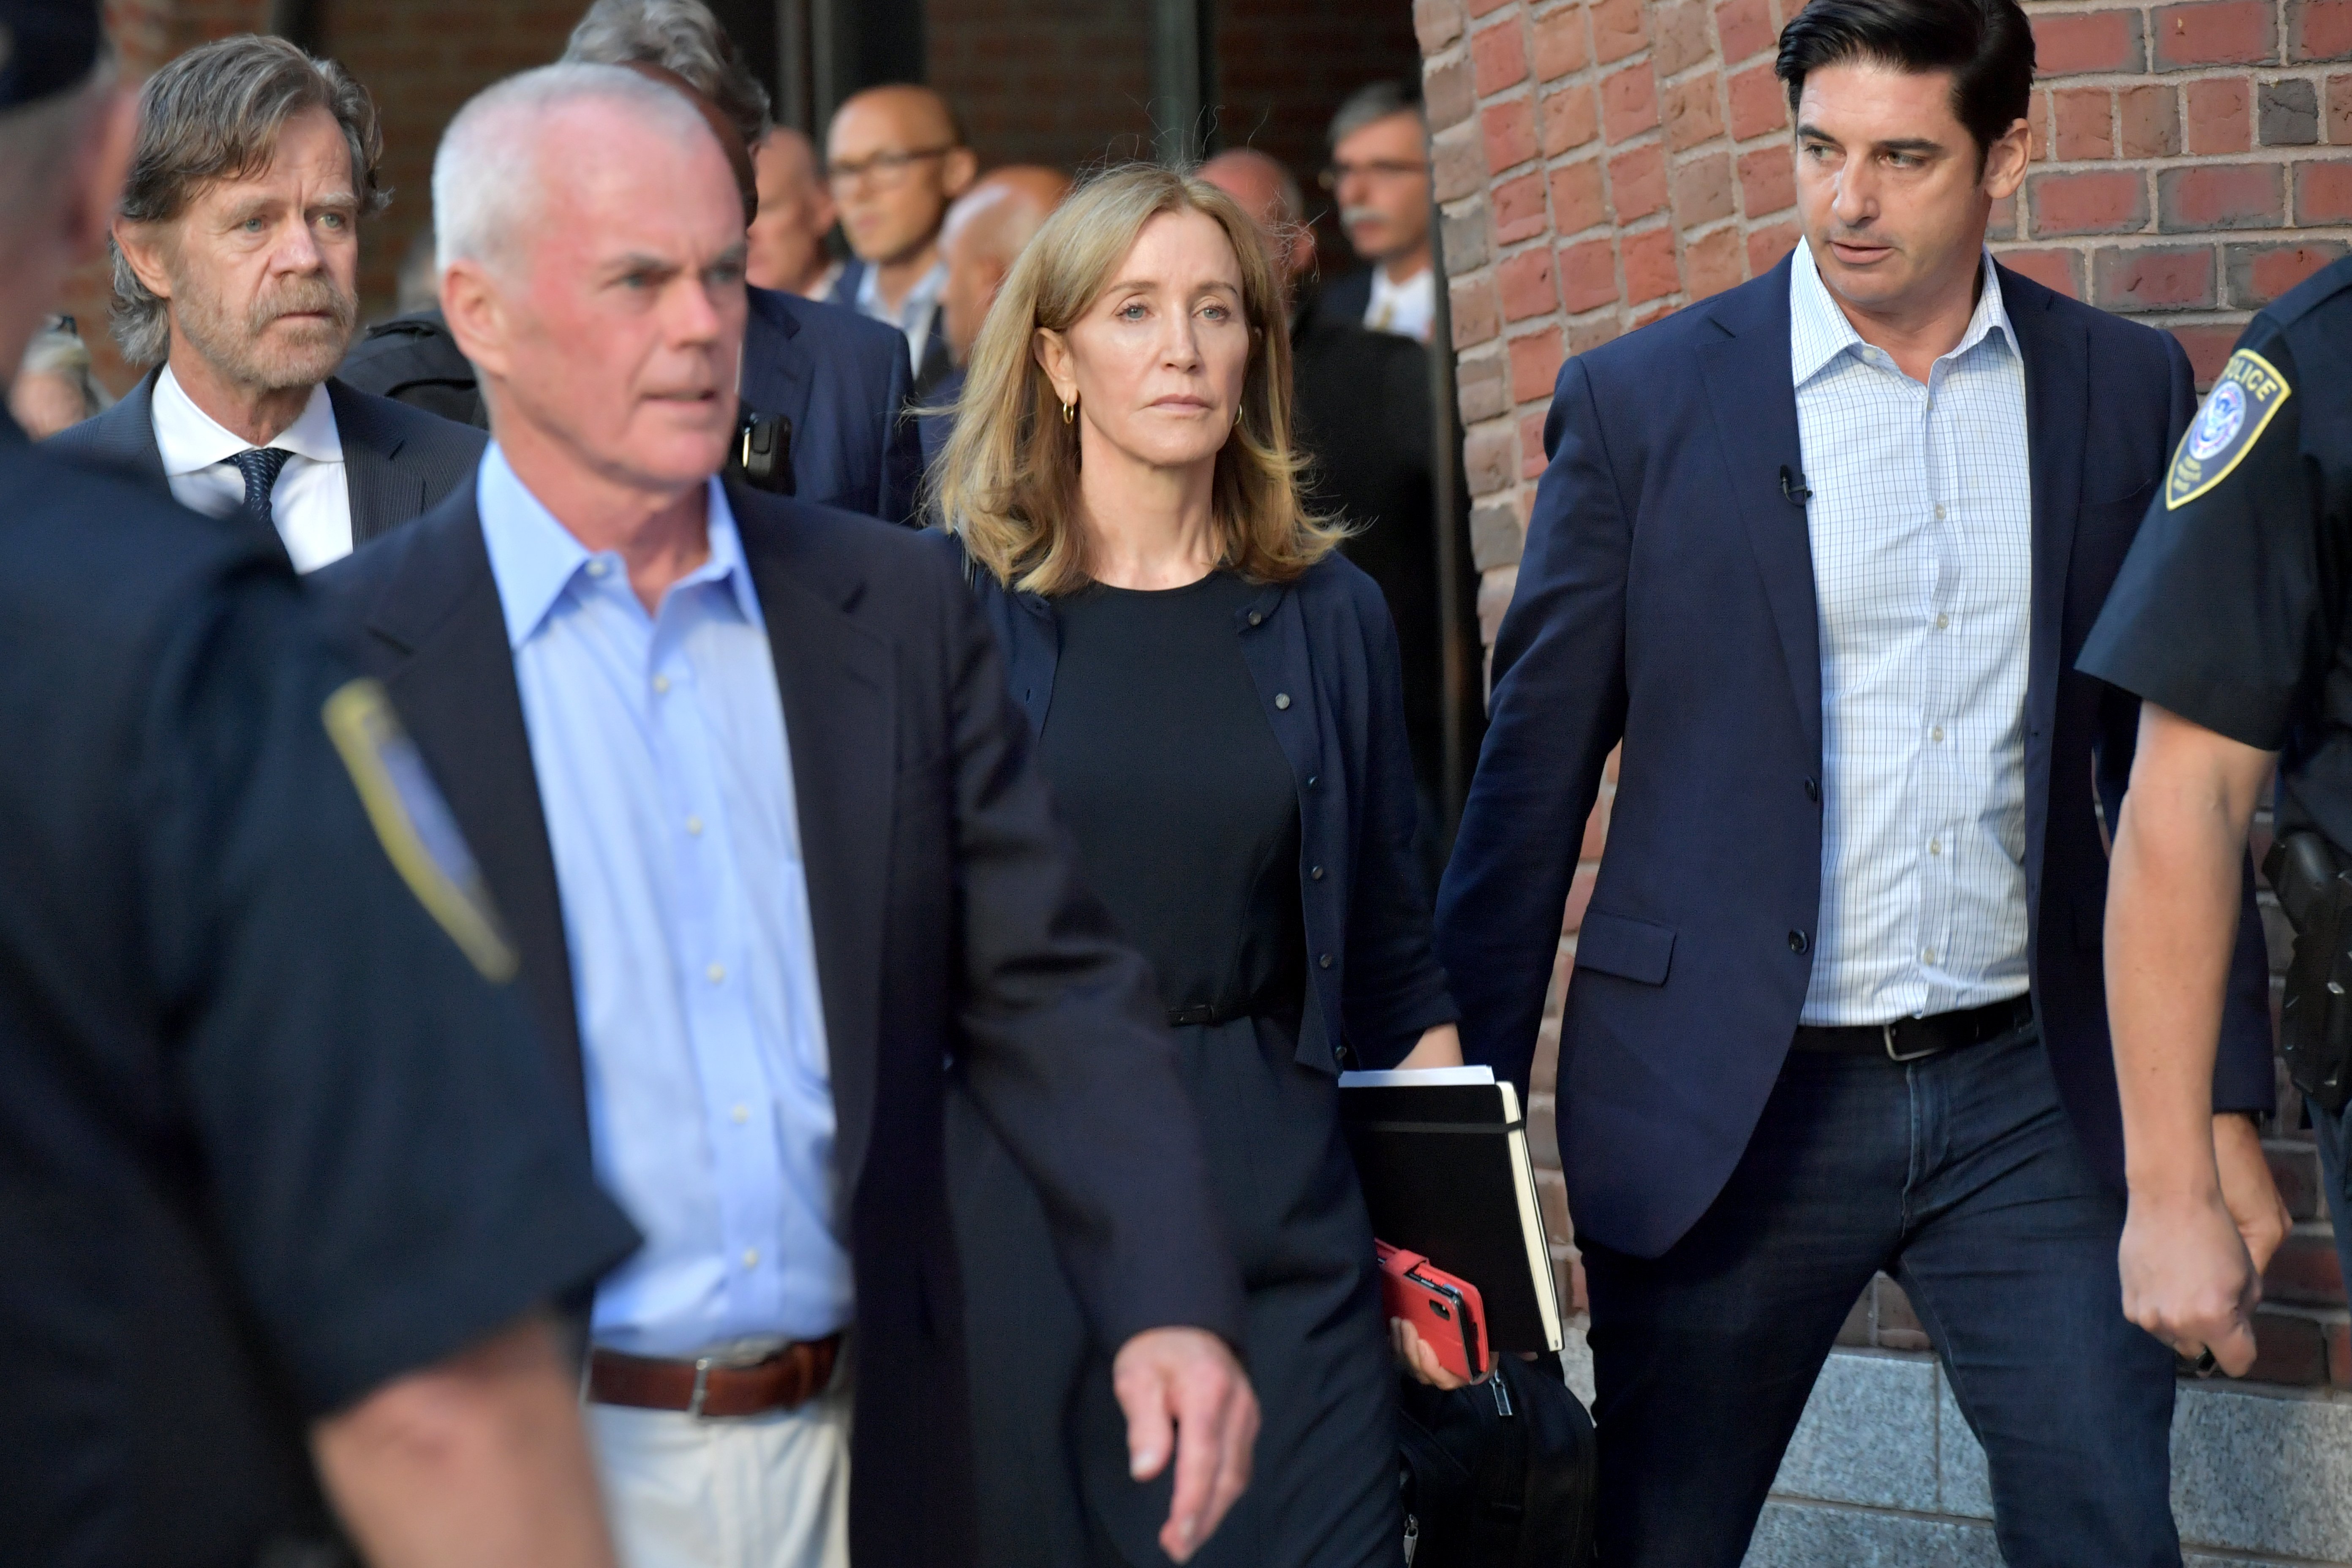 Felicity Huffman and William Macy exit John Moakley U.S. Courthouse  on September 13, 2019 | Photo: GettyImages